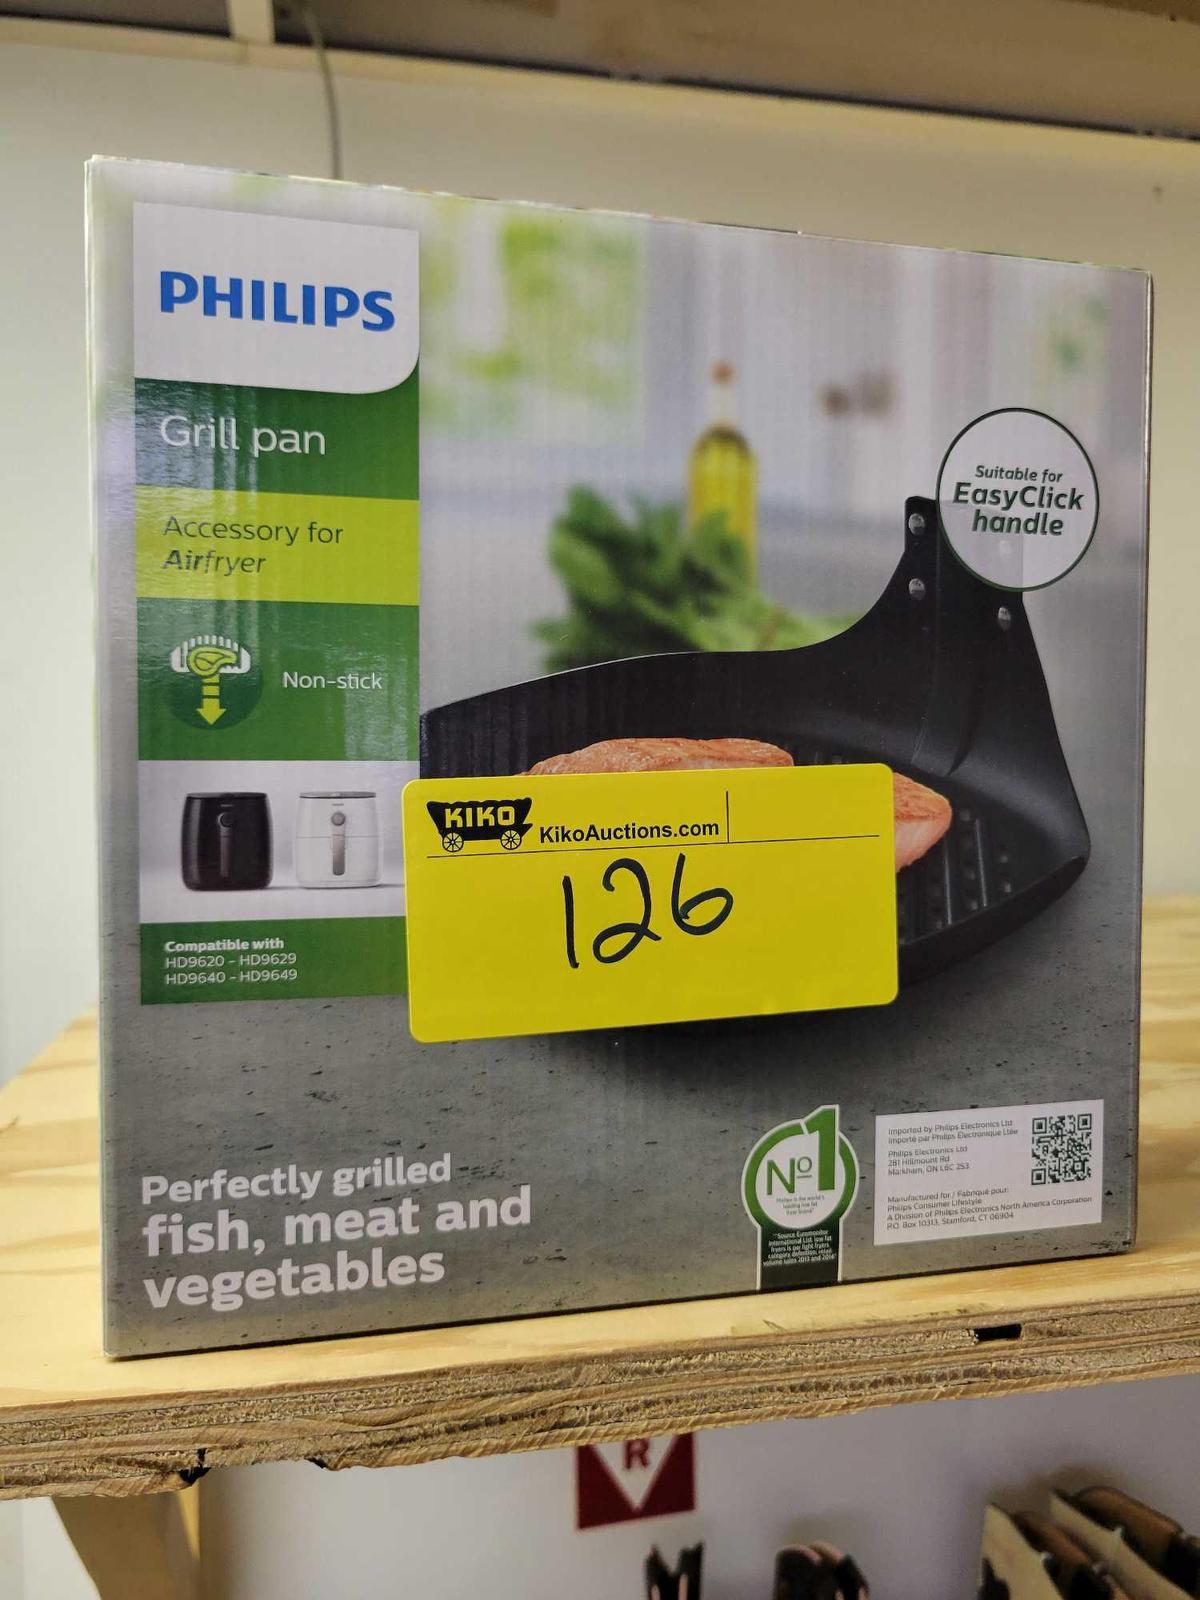 Philips grill pan